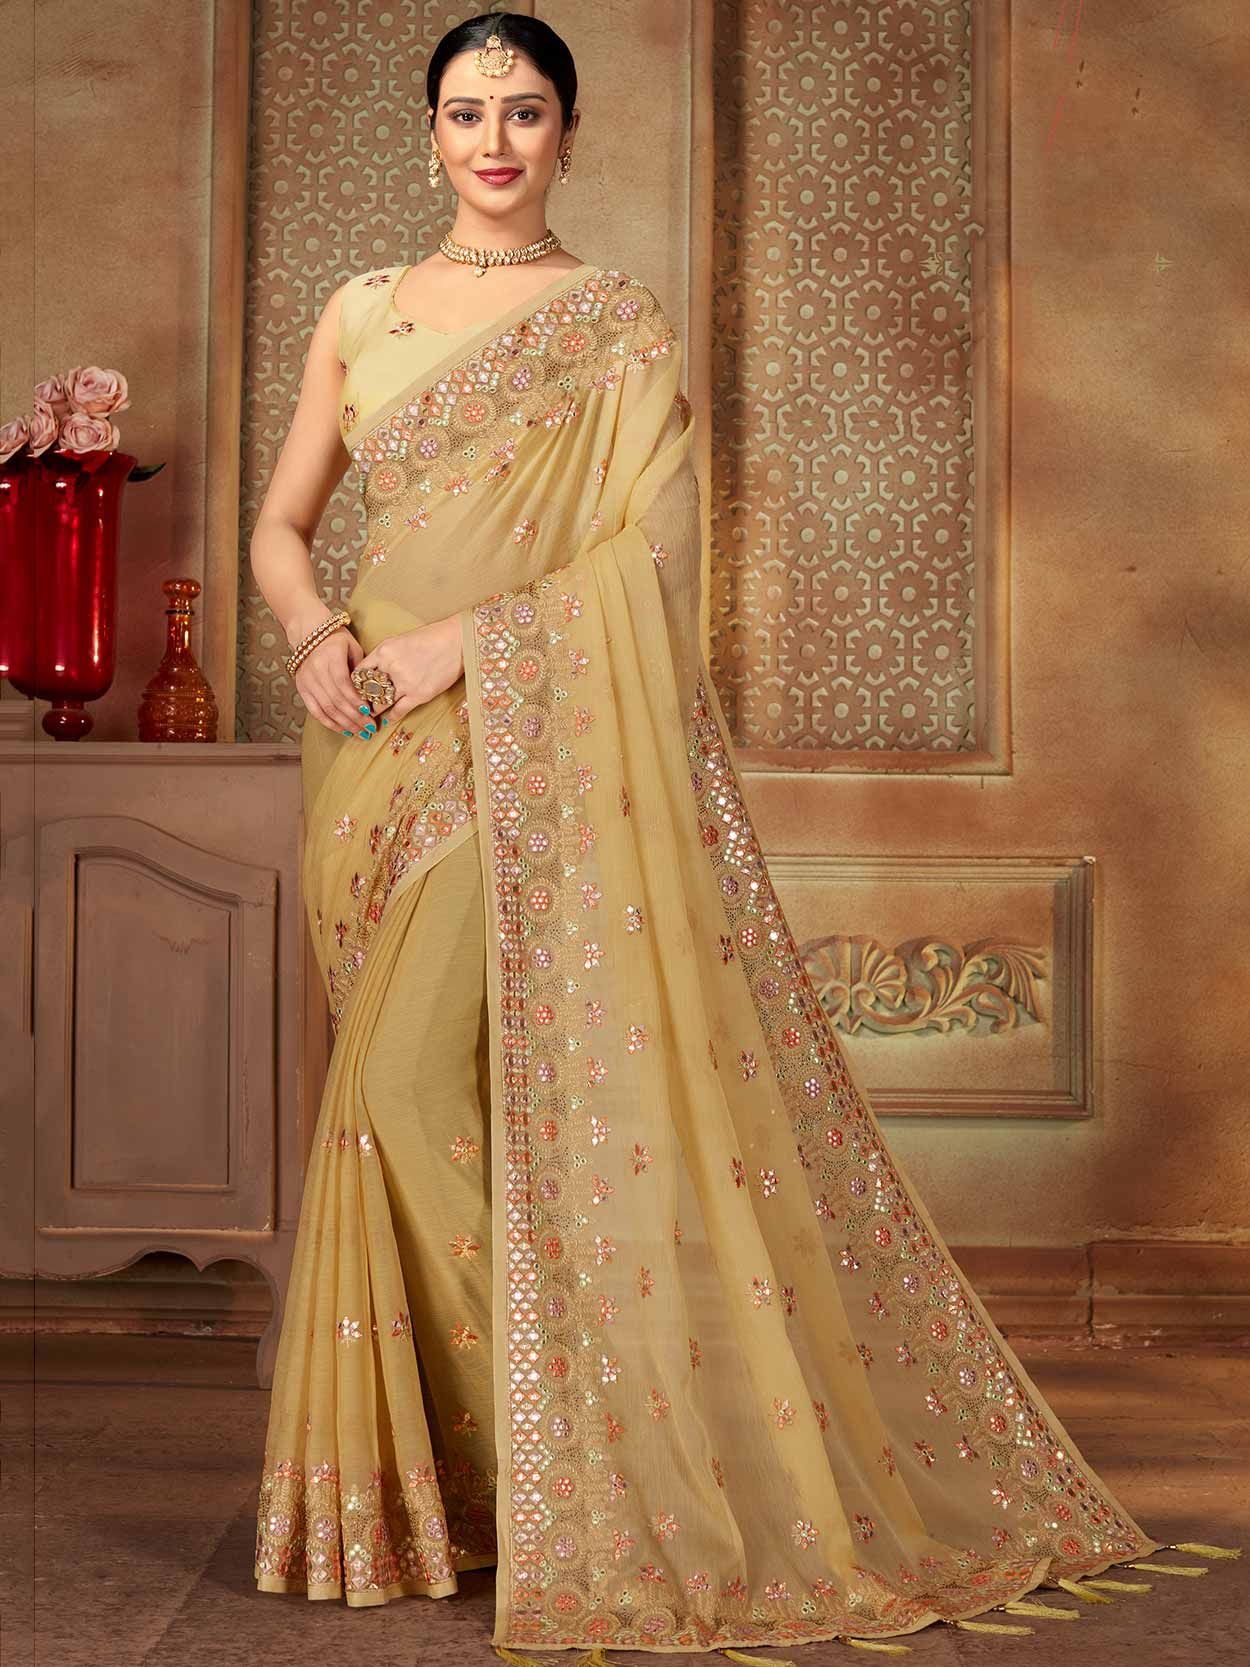 Dazzling Yellow Colored Designer Ready to Wear Saree, Bollywood Saree  latest collections | Bollywood Sarees